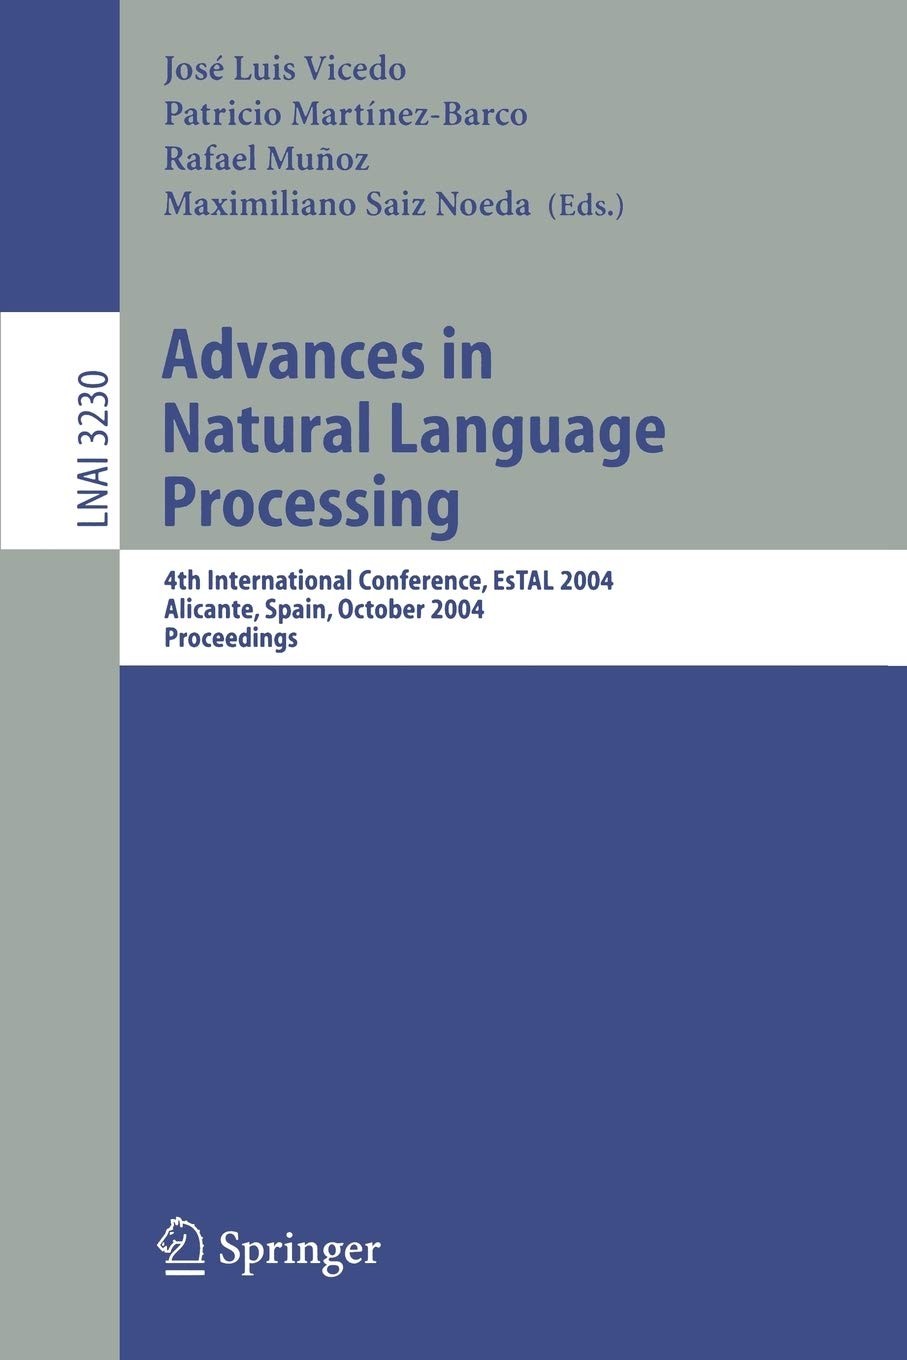 Advances in natural language processing : 4th international conference ; proceedings